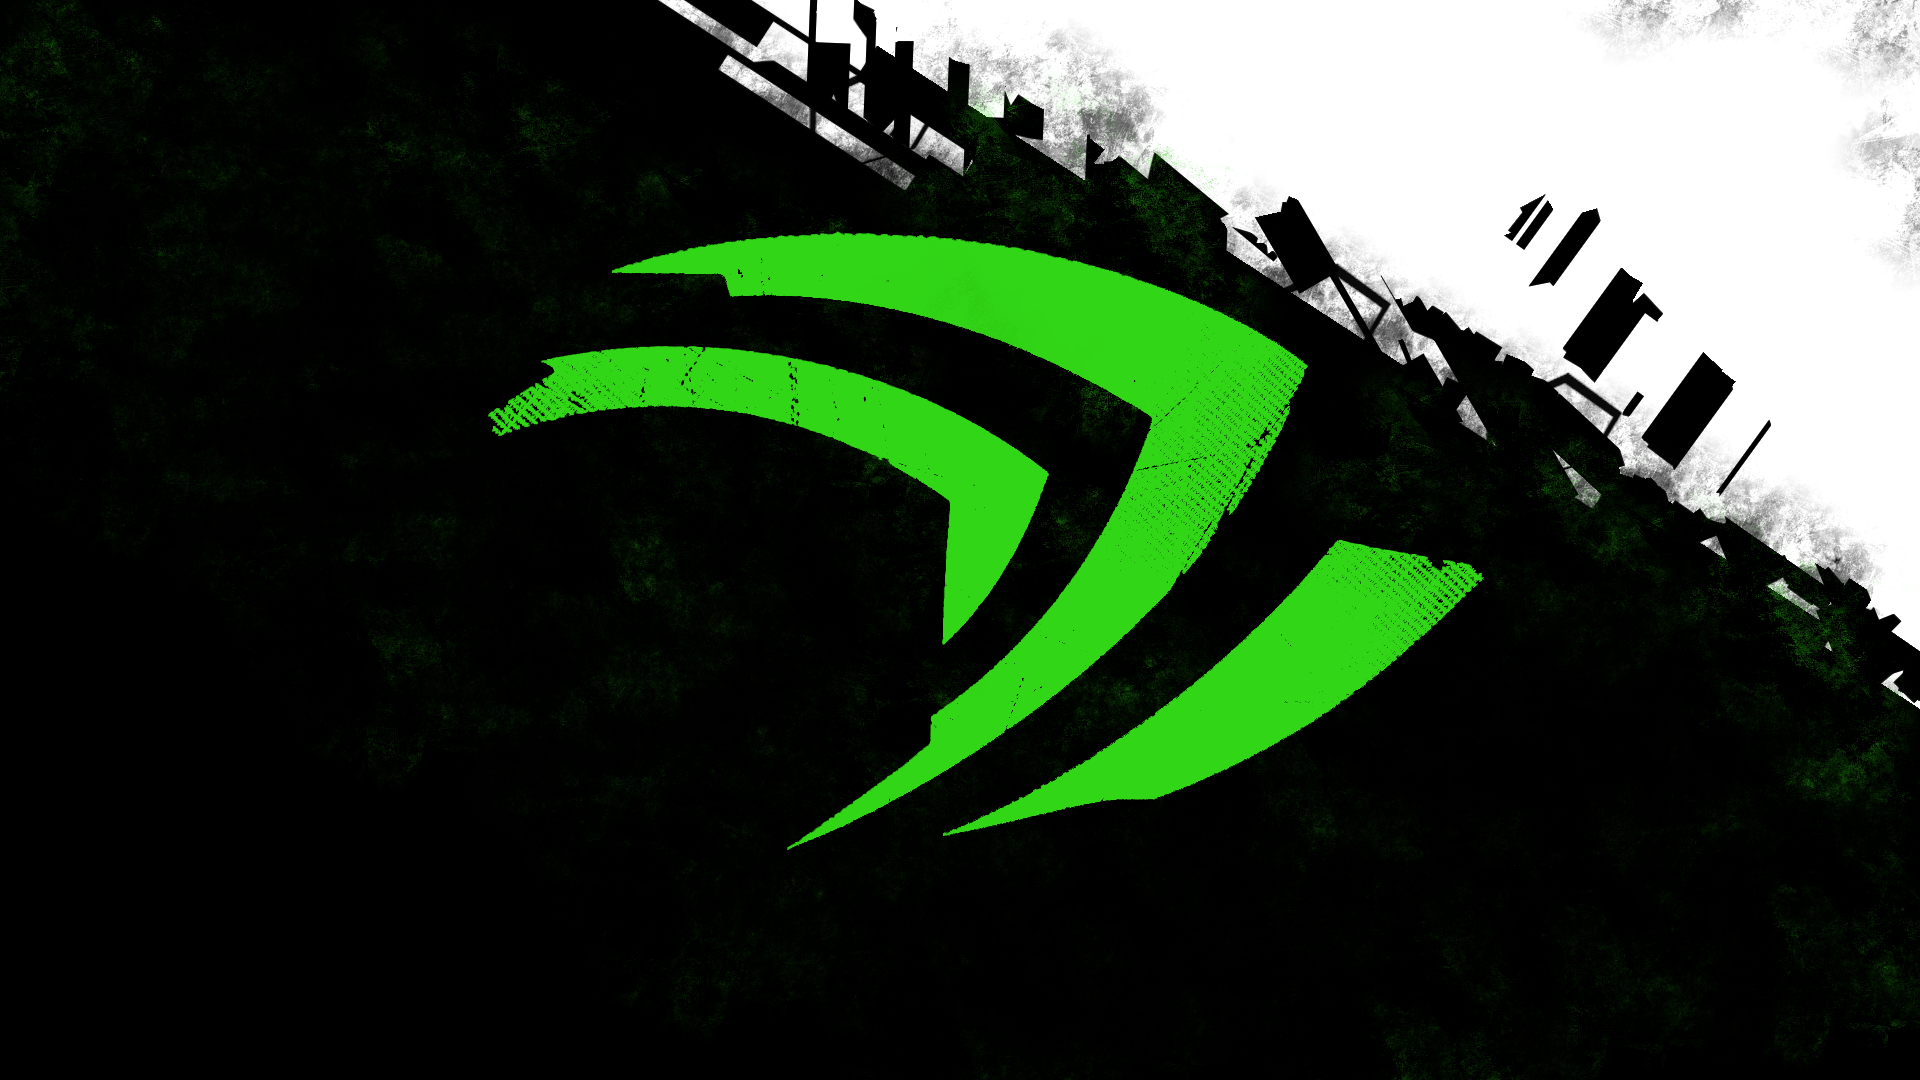 Nvidia HD Wallpaper and Background